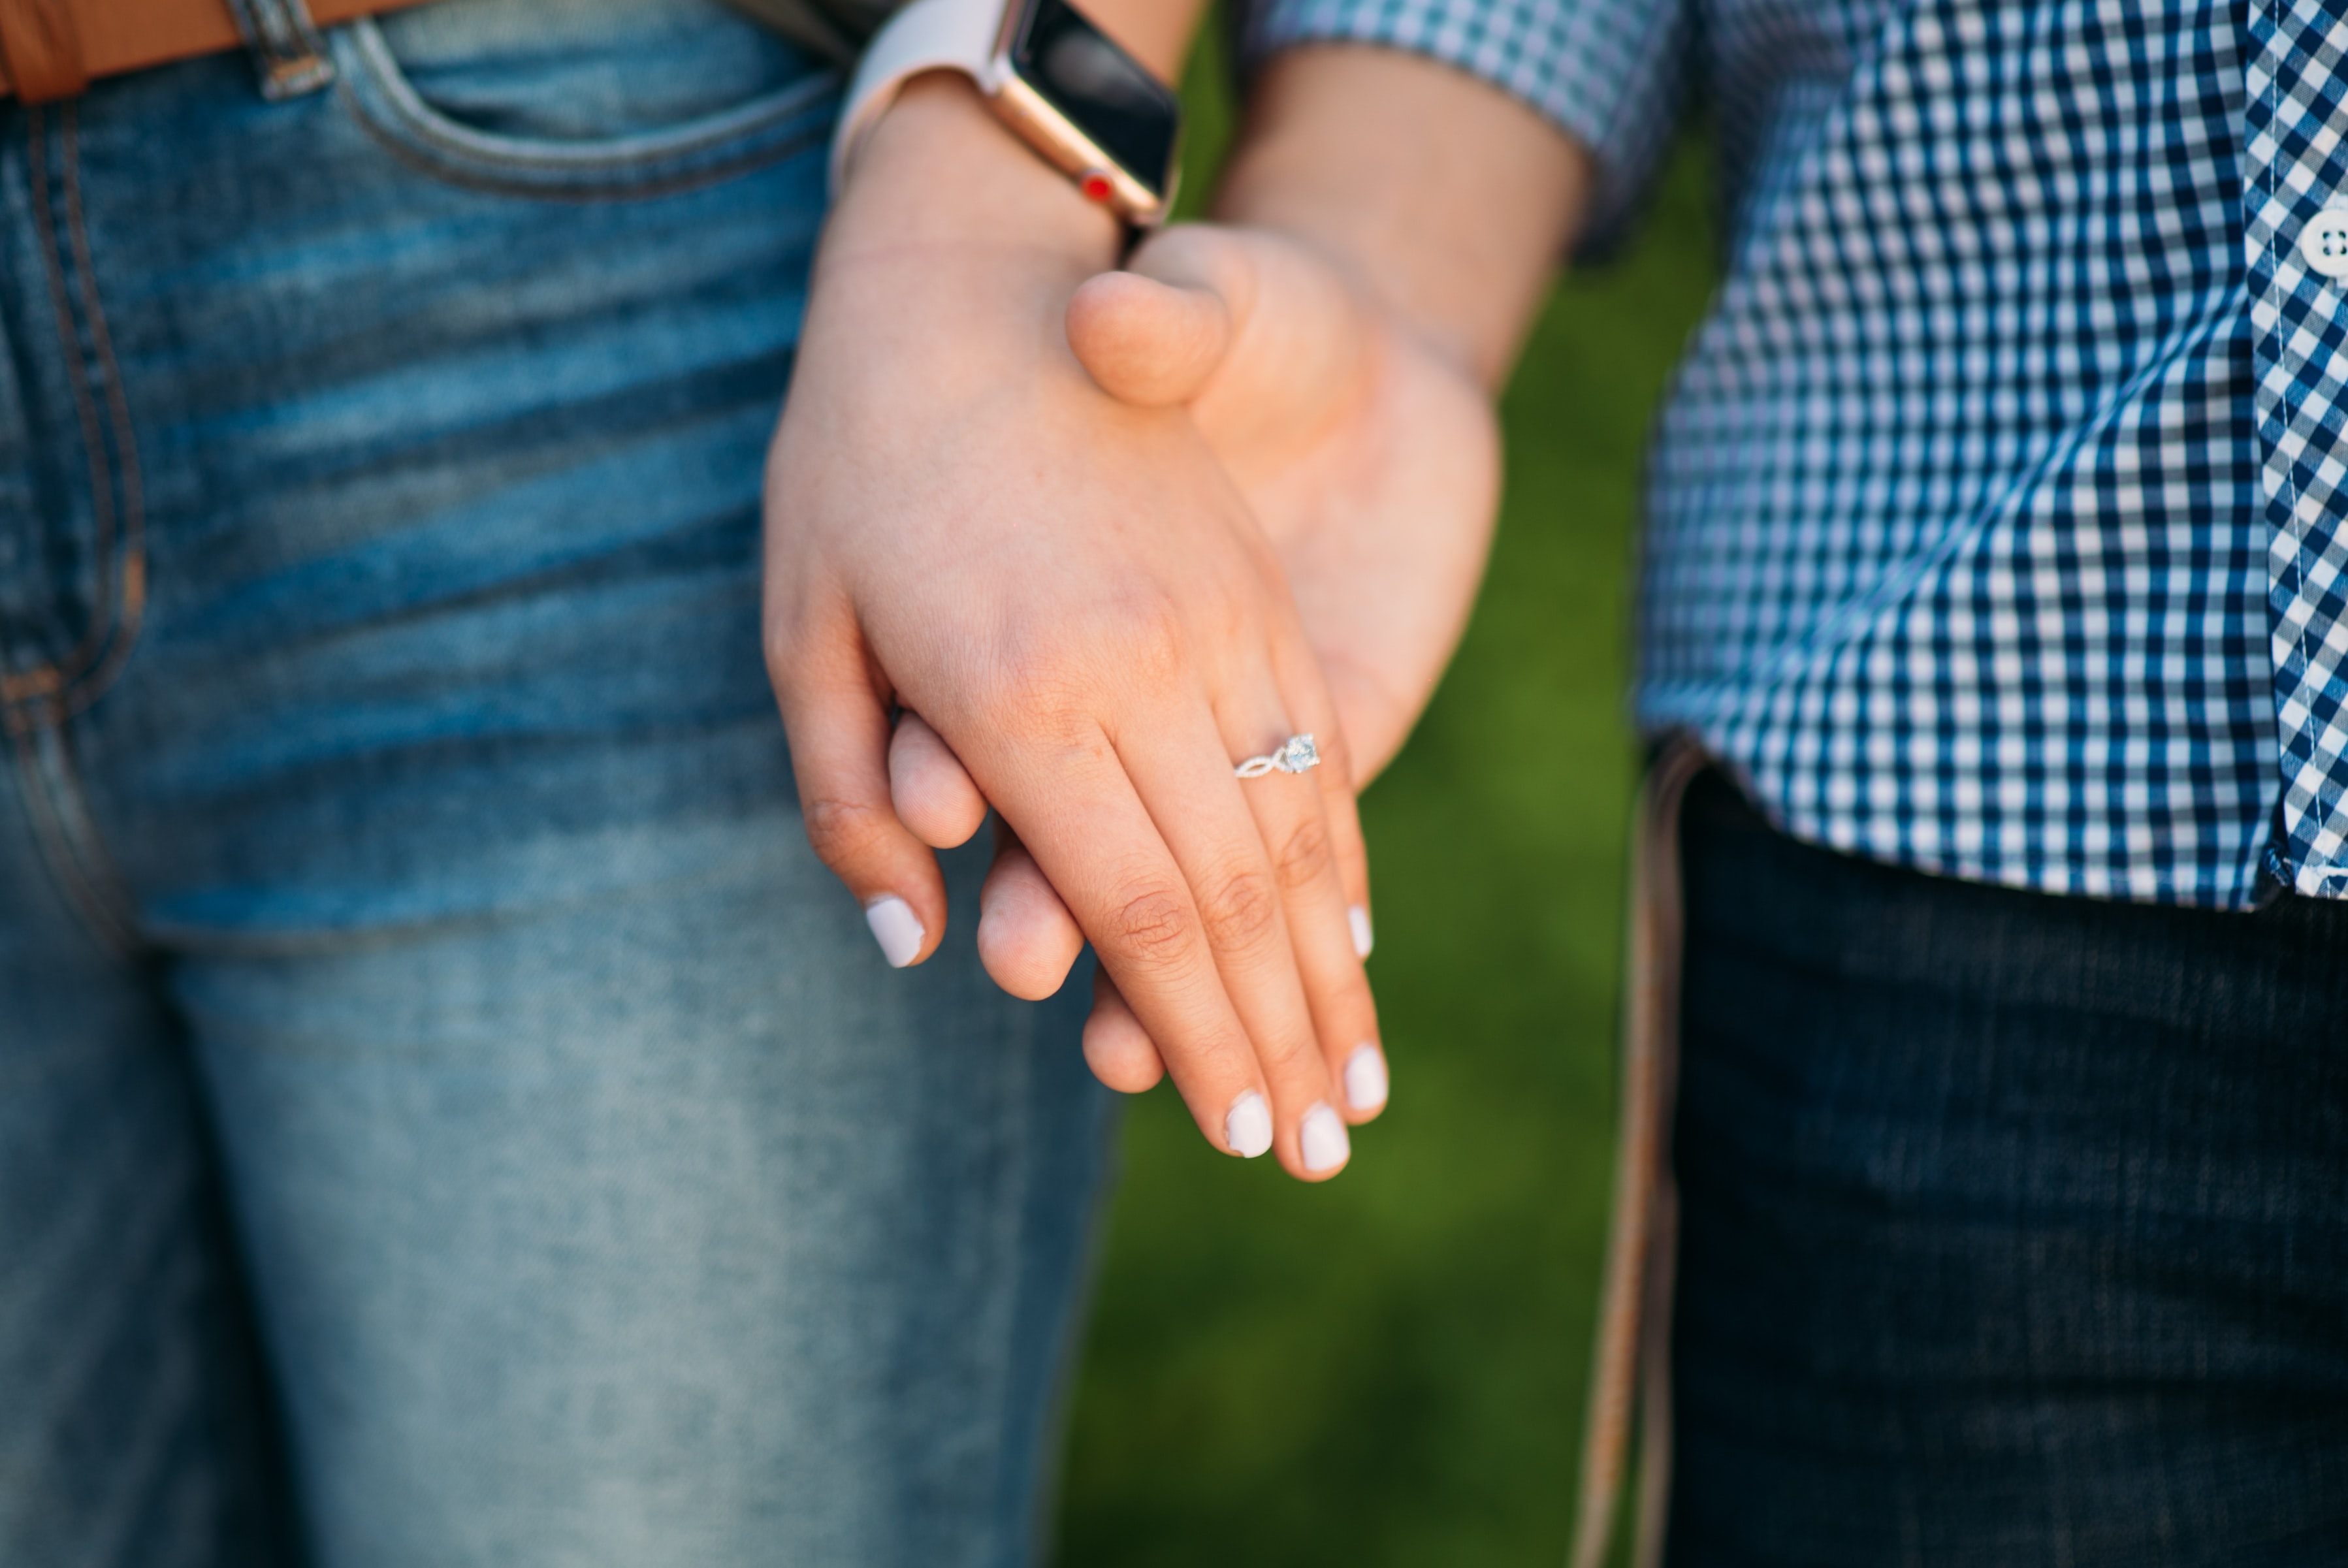 Domestic Partnership vs. Marriage: The Legal Benefits of Each